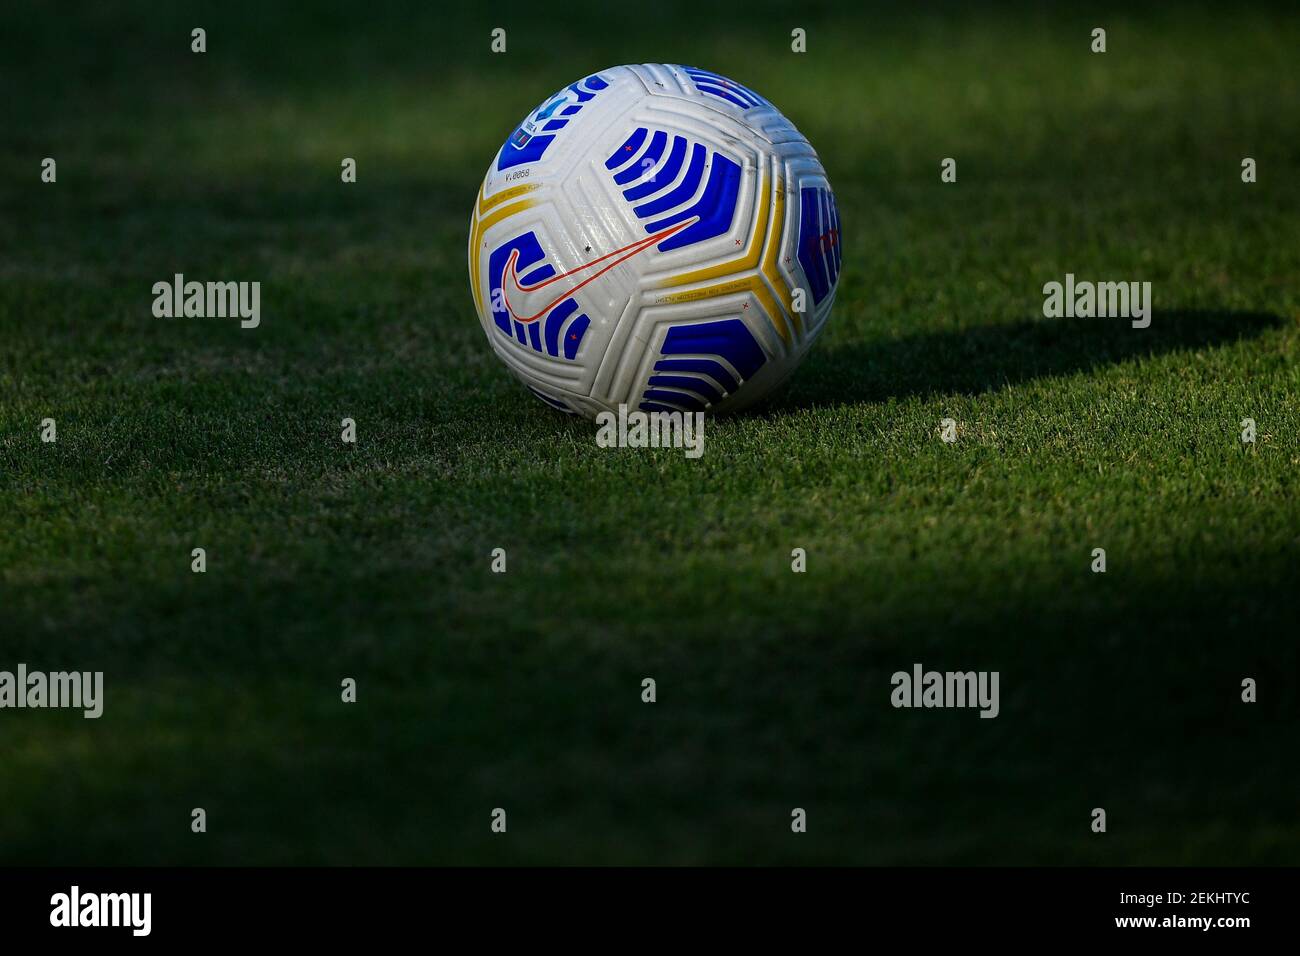 Serie A official nike ball named flights is seen on the picthc prior to the  friendly football match between Frosinone calcio and AS Roma at Benito  Stirpe stadium in Frosinone (Italy), September